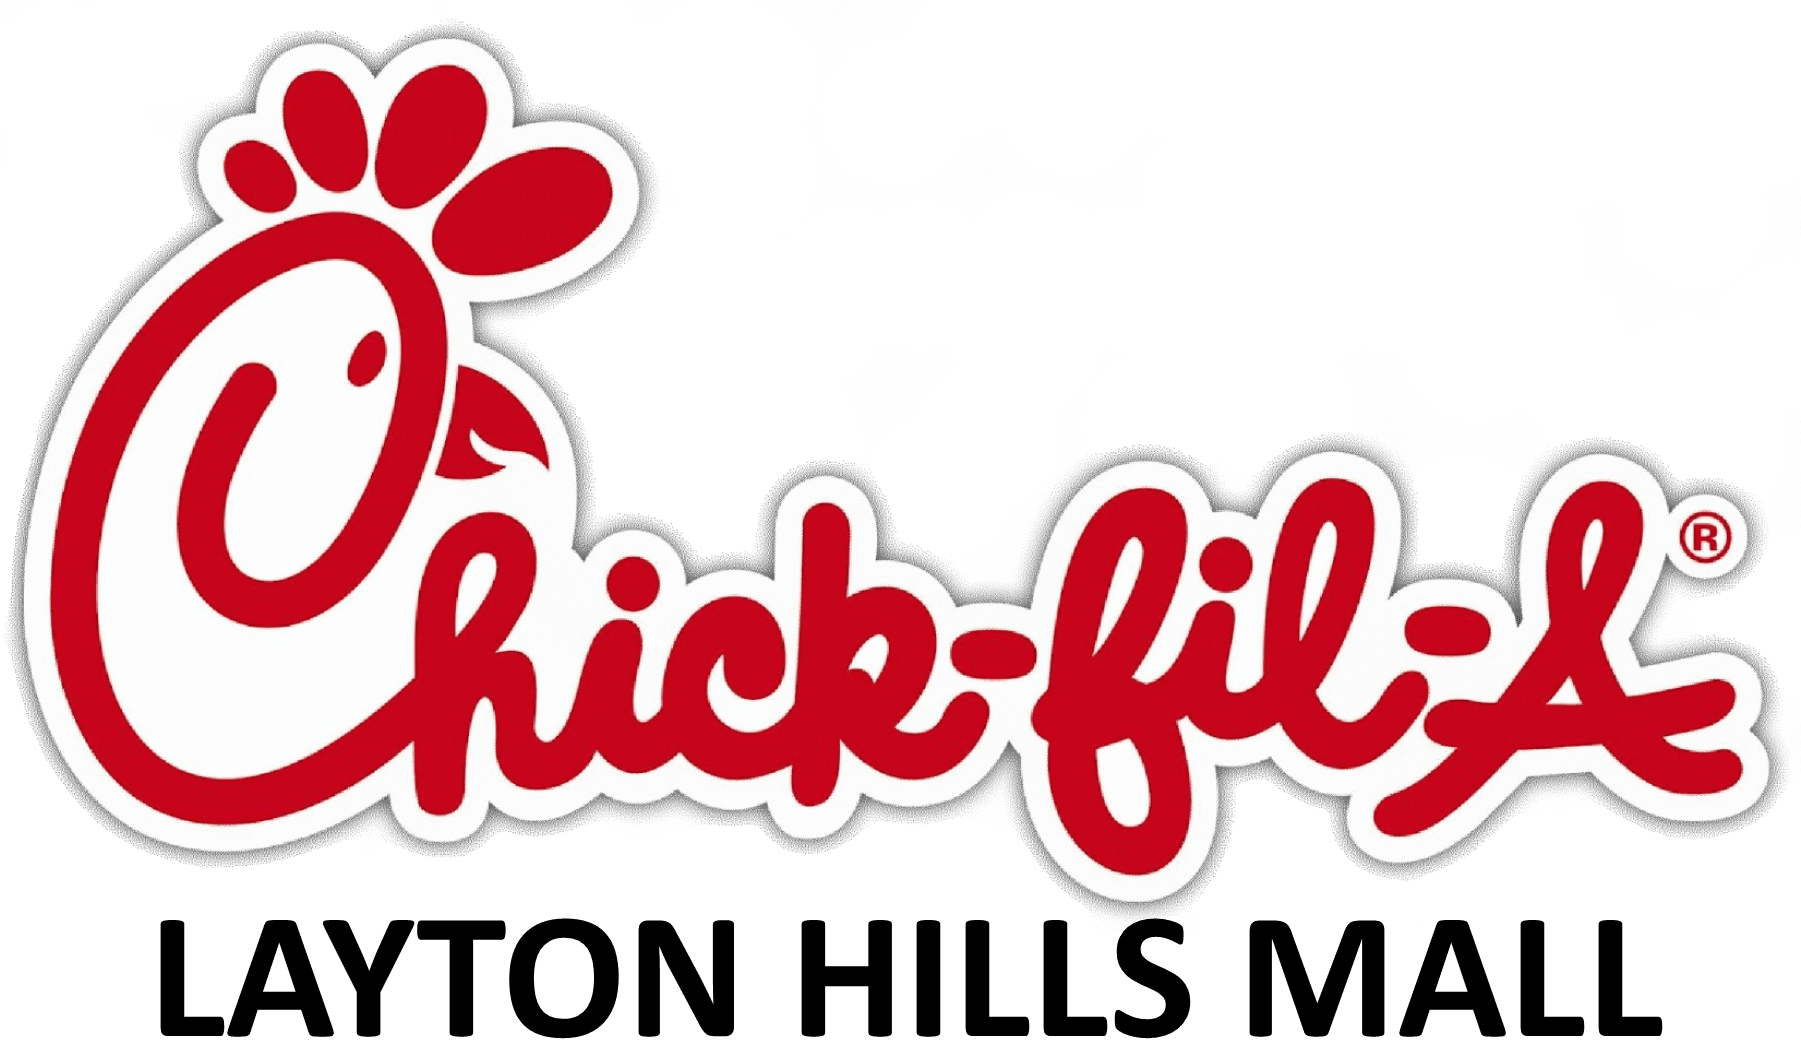 The Boring Rules - Chick Fil A Logo Black And White (1800x1100)